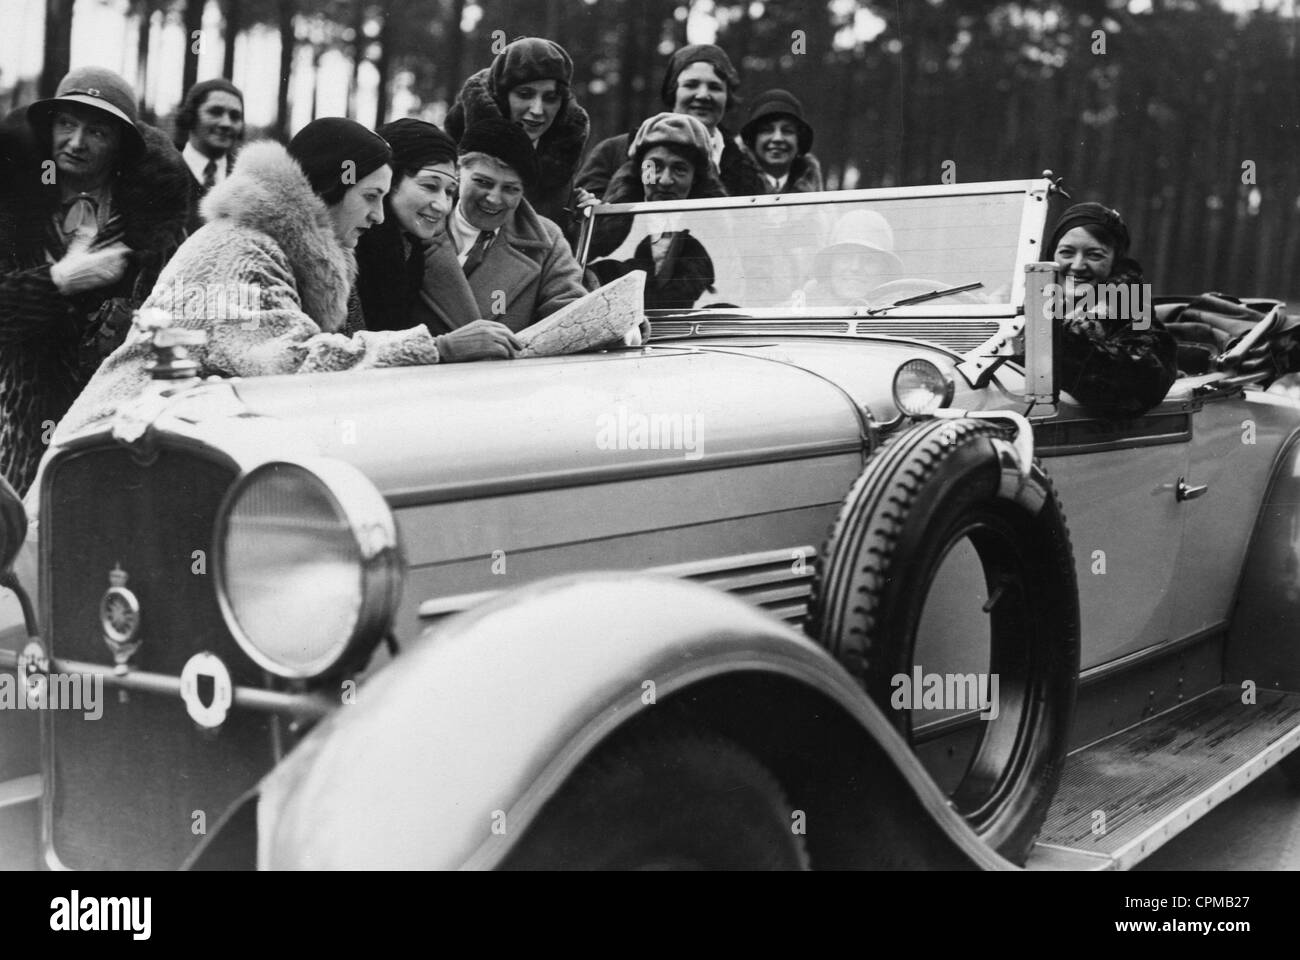 Women on an outing with the car, 1930's Stock Photo